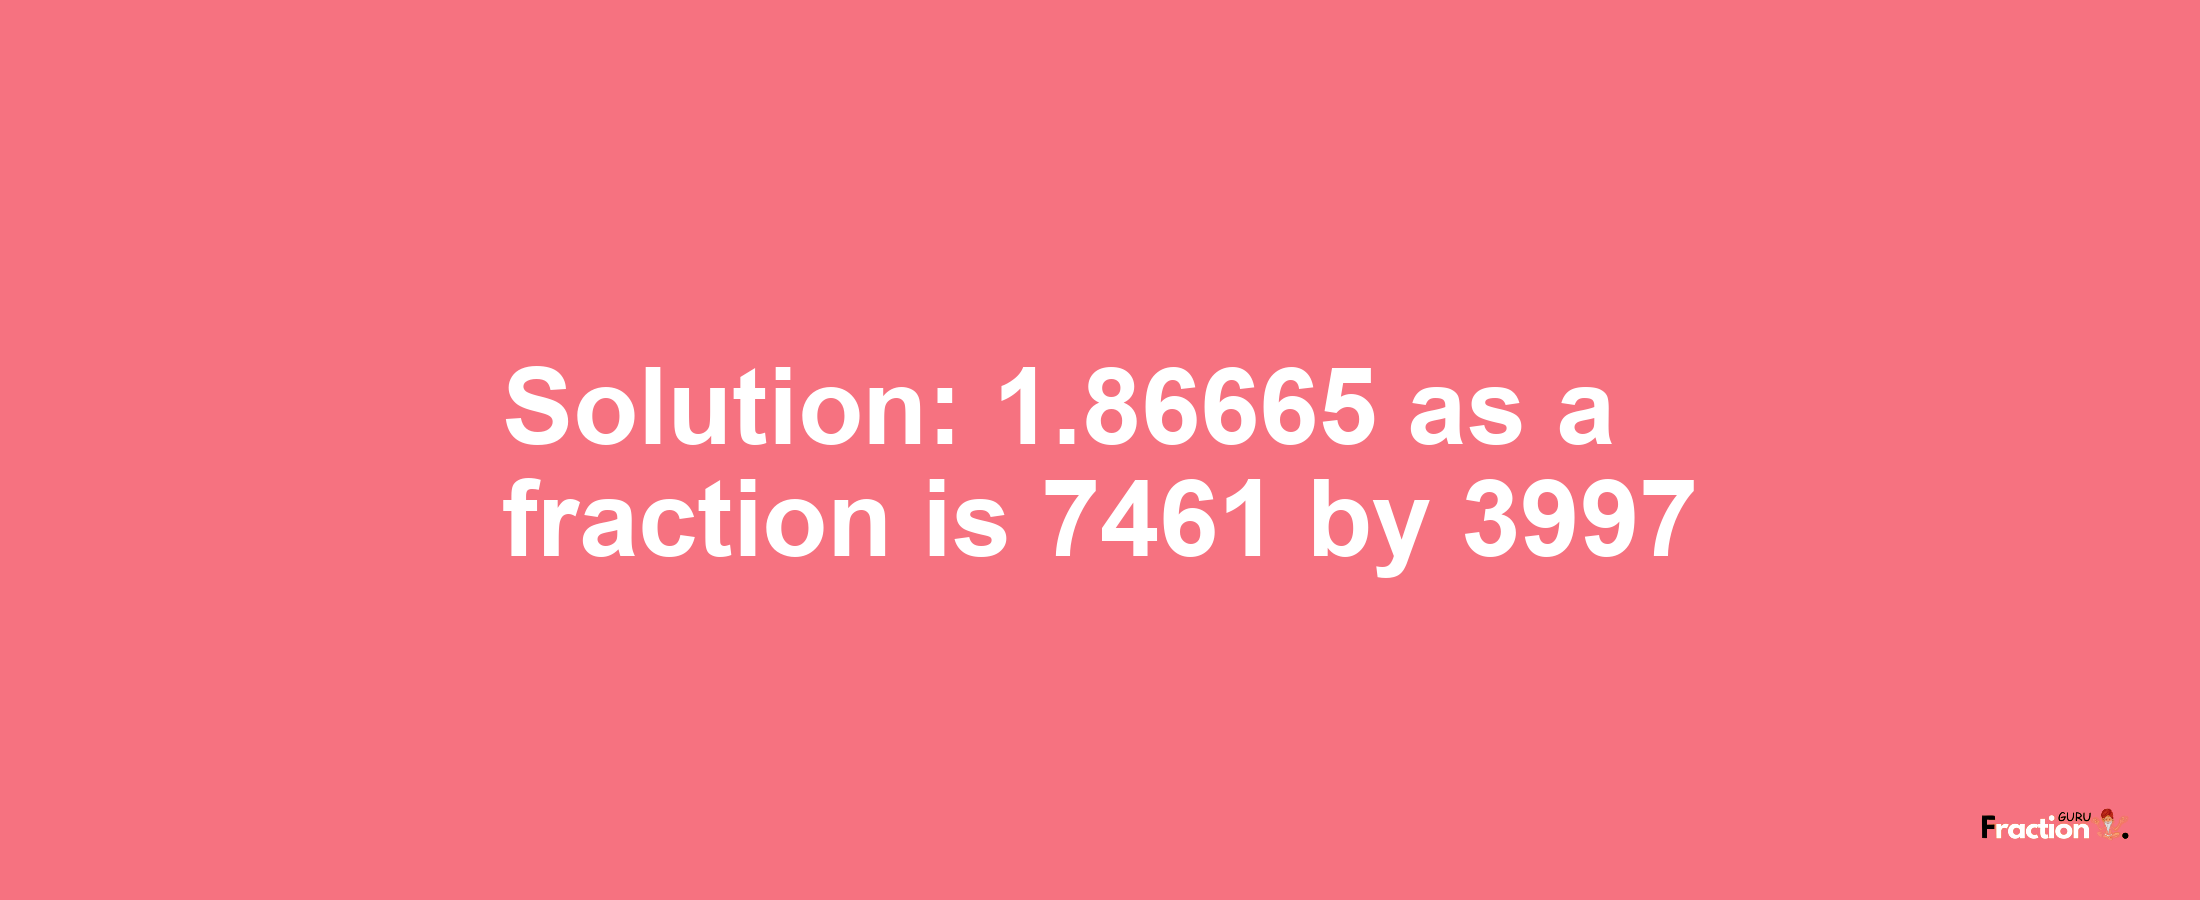 Solution:1.86665 as a fraction is 7461/3997